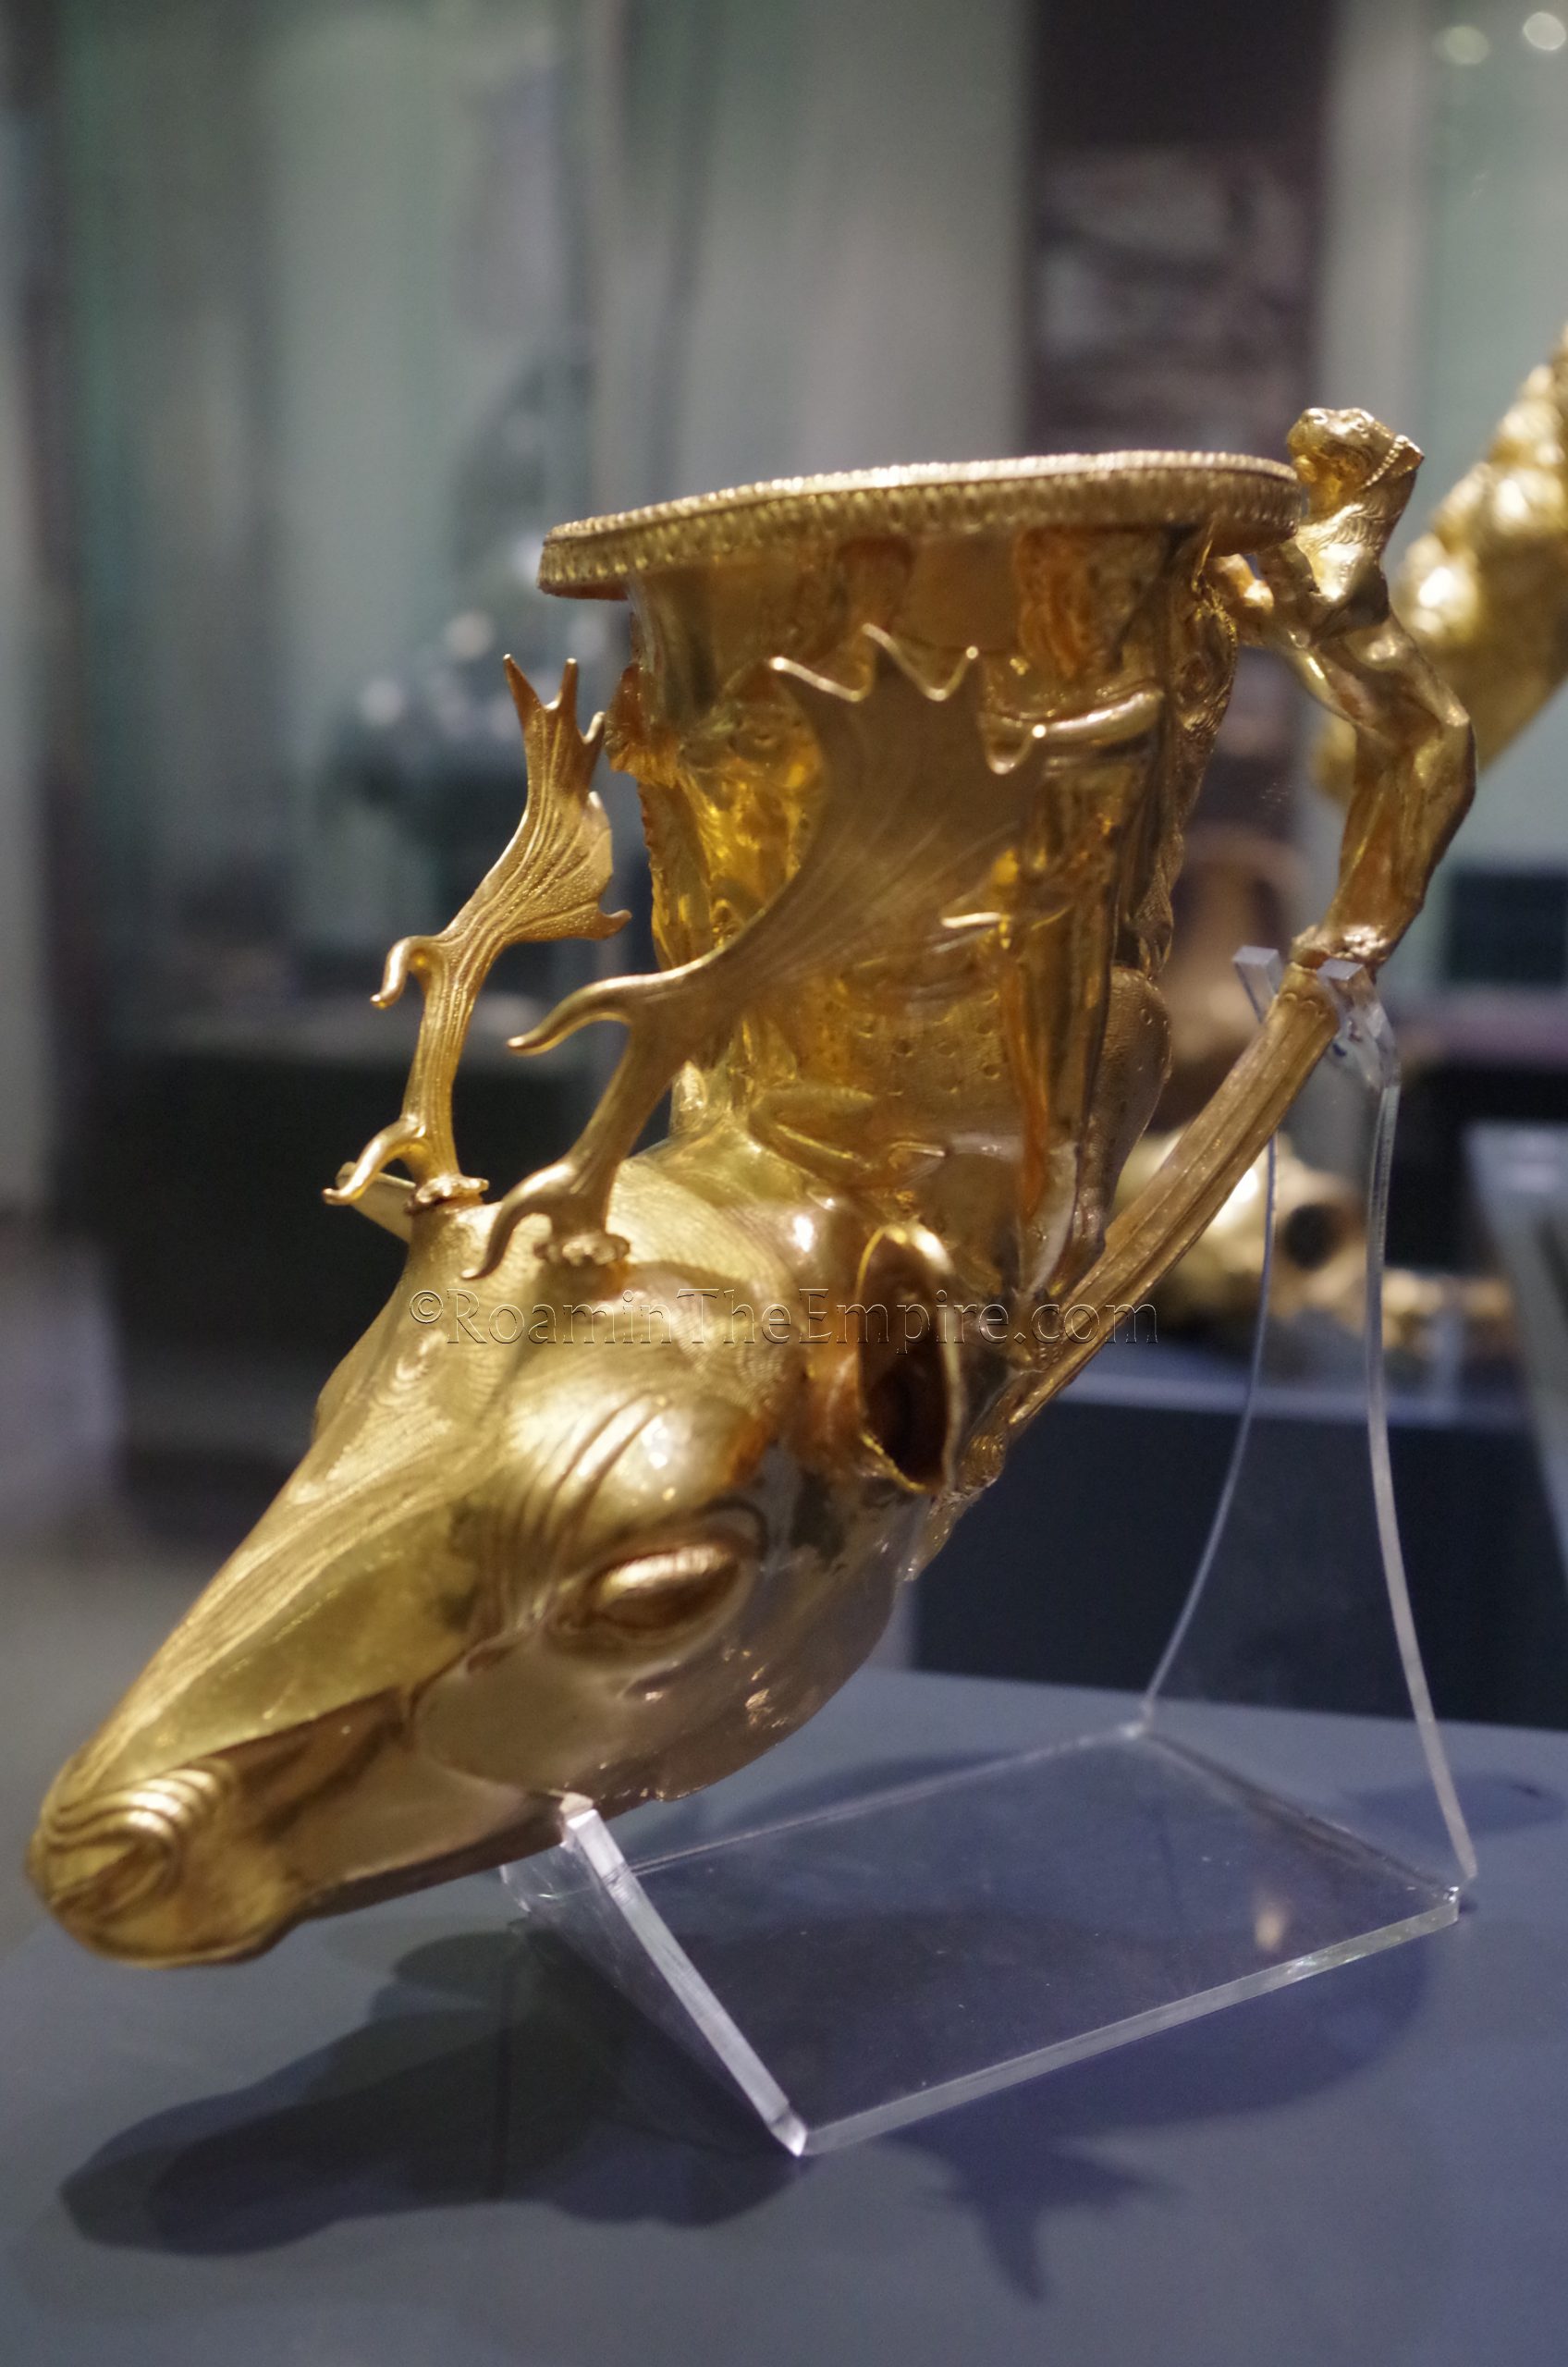 Stag shaped gold ryhton from the 3rd century BCE Panagyurishte Treasure in the Regional Archaeological Museum (discussed in second post)